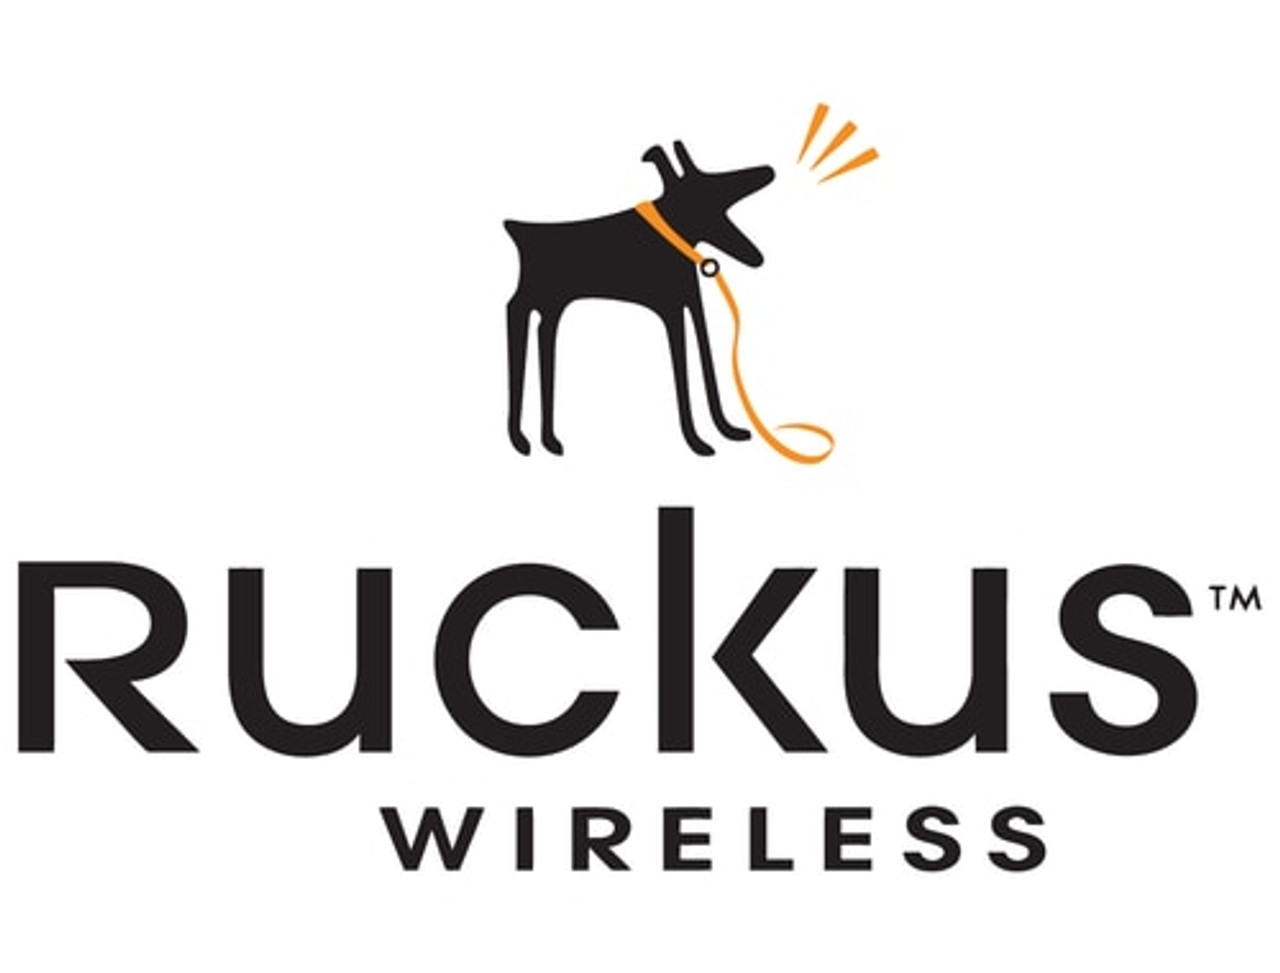 Ruckus Fiber Backpack P01-0500-0000 adds GPON and Active Fiber backhaul support to H510.   P01-0500-000 can be co-installed with H510 or be used as a standalone unit. Includes short ethernet cable for PoE output. Doesn't include SFP optical modules or DC power supply. DC power supply is required and should be purchased separately (902-0170-XXXX)